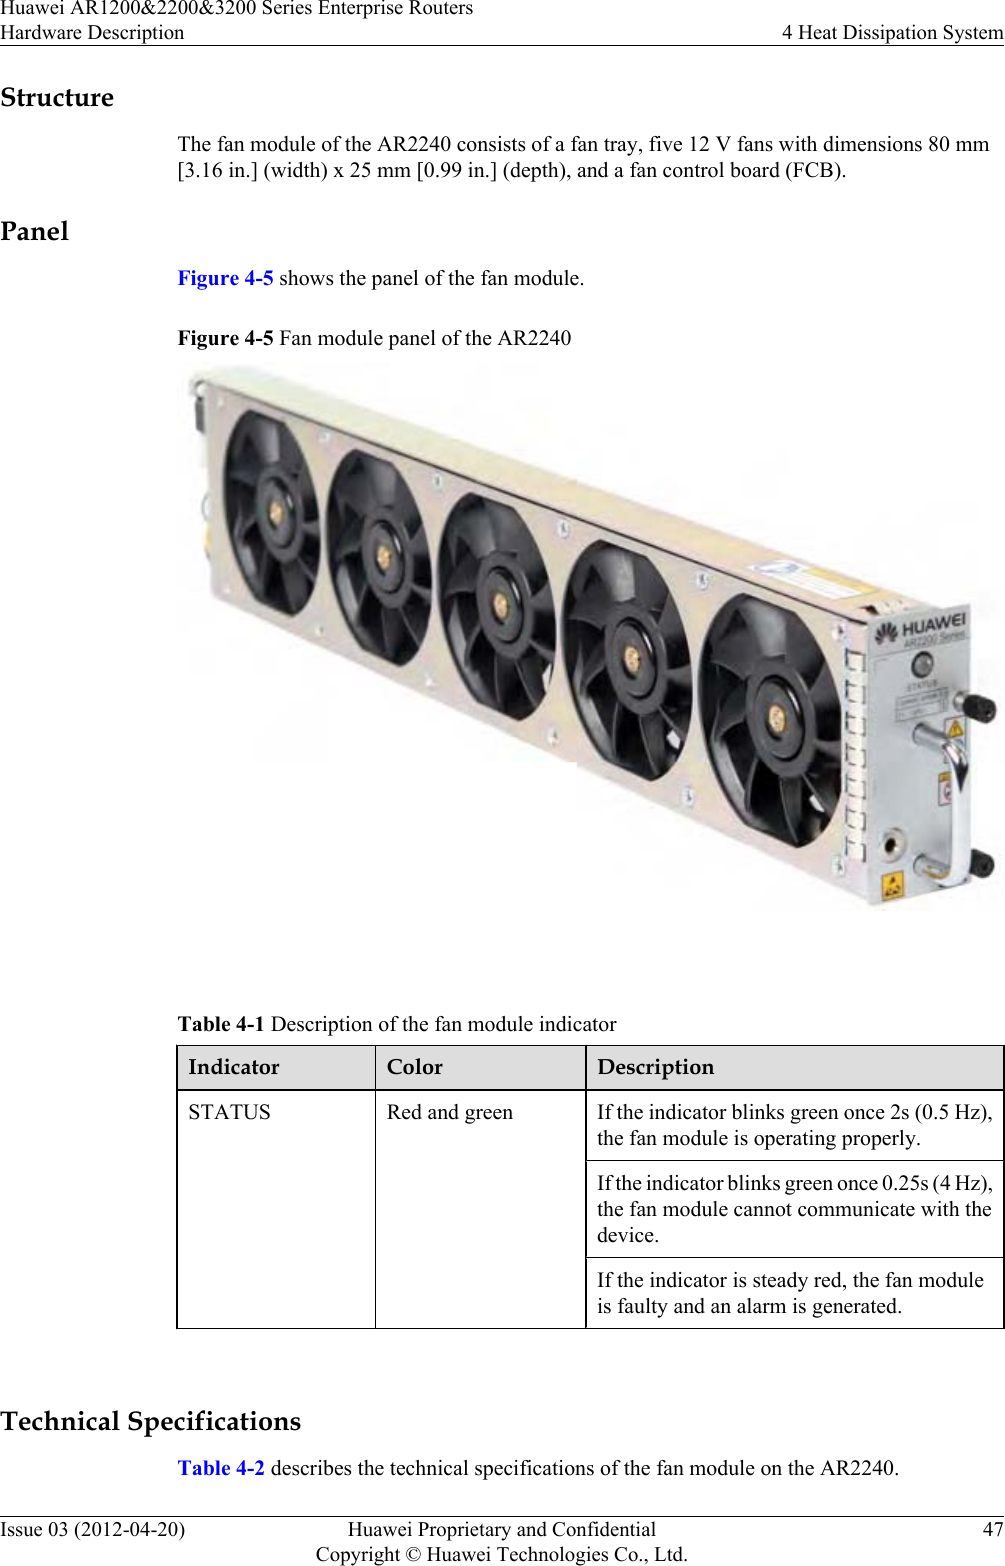 StructureThe fan module of the AR2240 consists of a fan tray, five 12 V fans with dimensions 80 mm[3.16 in.] (width) x 25 mm [0.99 in.] (depth), and a fan control board (FCB).PanelFigure 4-5 shows the panel of the fan module.Figure 4-5 Fan module panel of the AR2240 Table 4-1 Description of the fan module indicatorIndicator Color DescriptionSTATUS Red and green If the indicator blinks green once 2s (0.5 Hz),the fan module is operating properly.If the indicator blinks green once 0.25s (4 Hz),the fan module cannot communicate with thedevice.If the indicator is steady red, the fan moduleis faulty and an alarm is generated. Technical SpecificationsTable 4-2 describes the technical specifications of the fan module on the AR2240.Huawei AR1200&amp;2200&amp;3200 Series Enterprise RoutersHardware Description 4 Heat Dissipation SystemIssue 03 (2012-04-20) Huawei Proprietary and ConfidentialCopyright © Huawei Technologies Co., Ltd.47